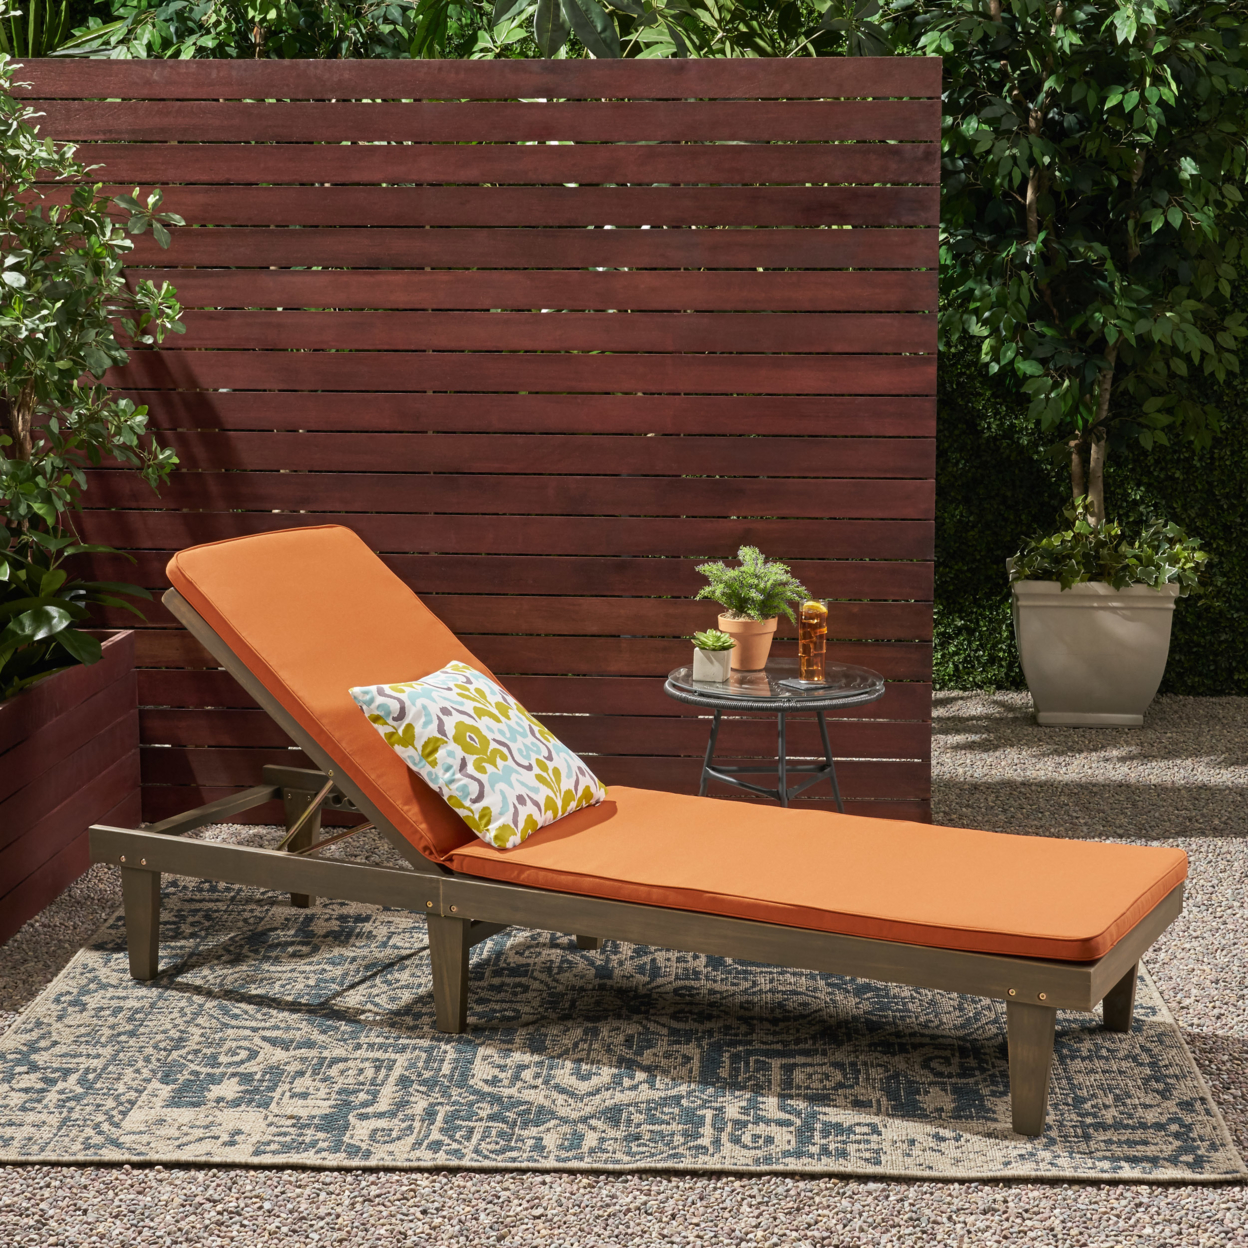 Yvette Outdoor Acacia Wood Chaise Lounge And Cushion Set - Gray Finish + Rust Orange